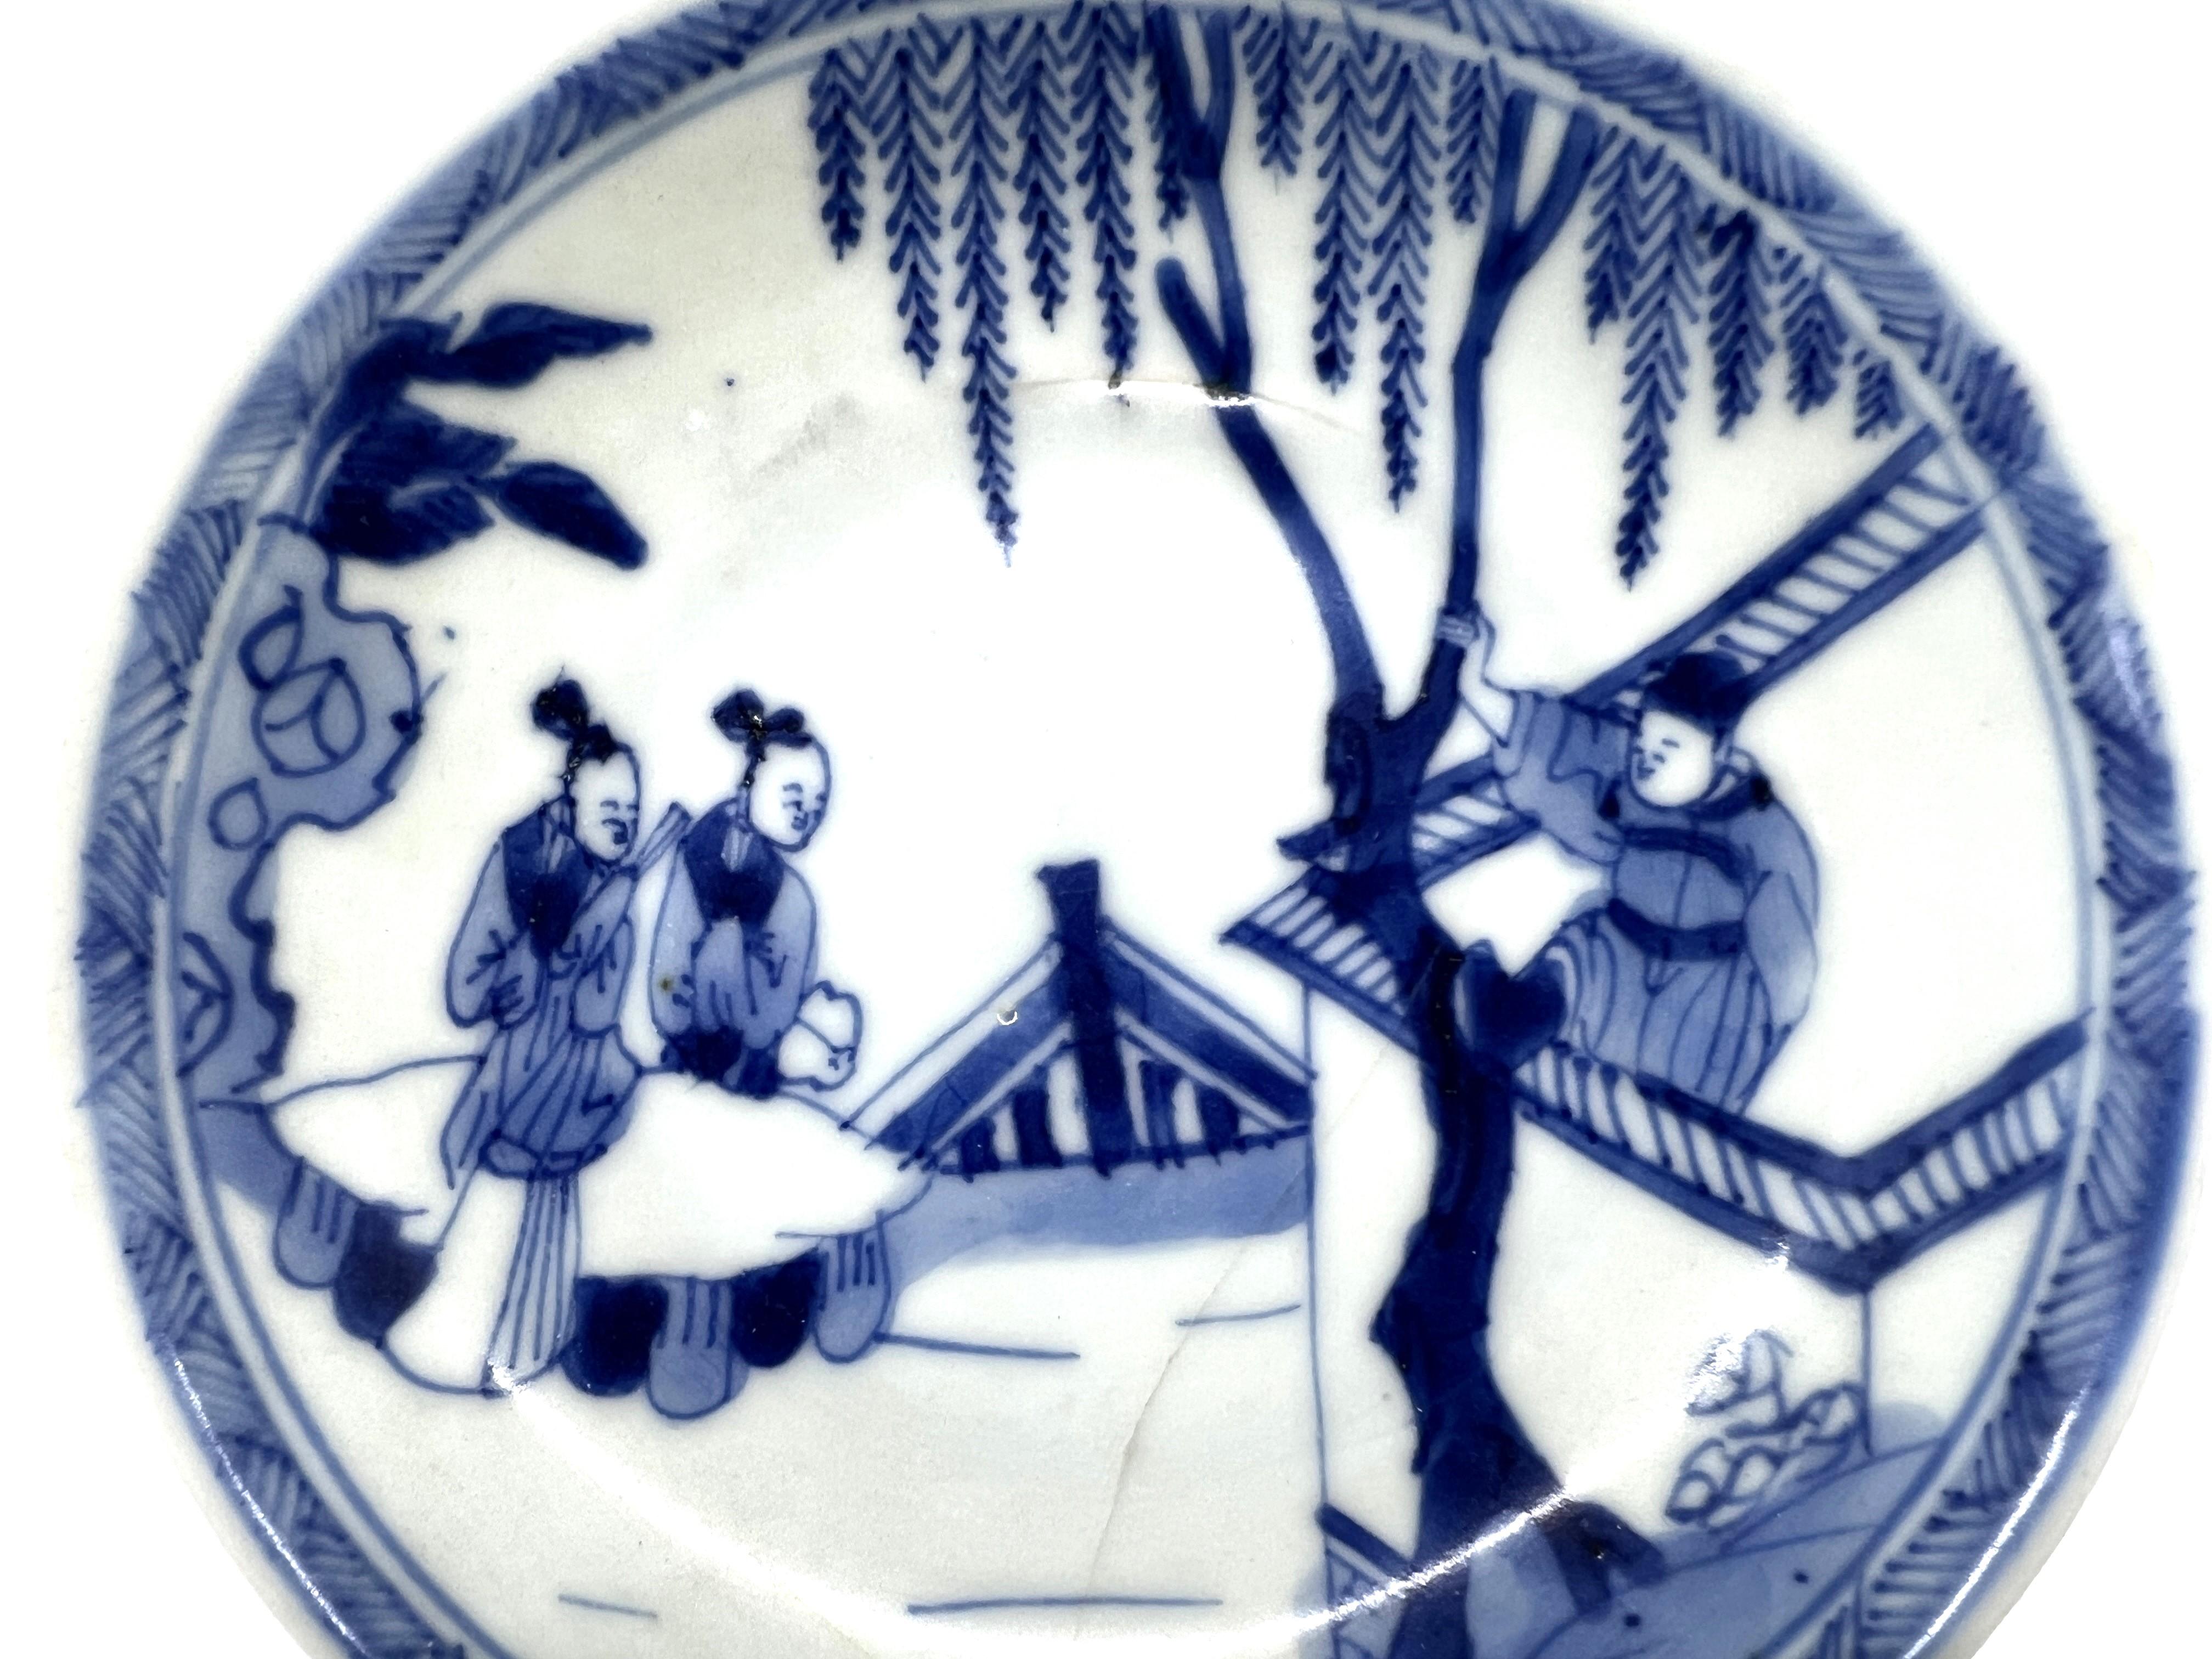 The scene depicted in the porcelain is inspired by 